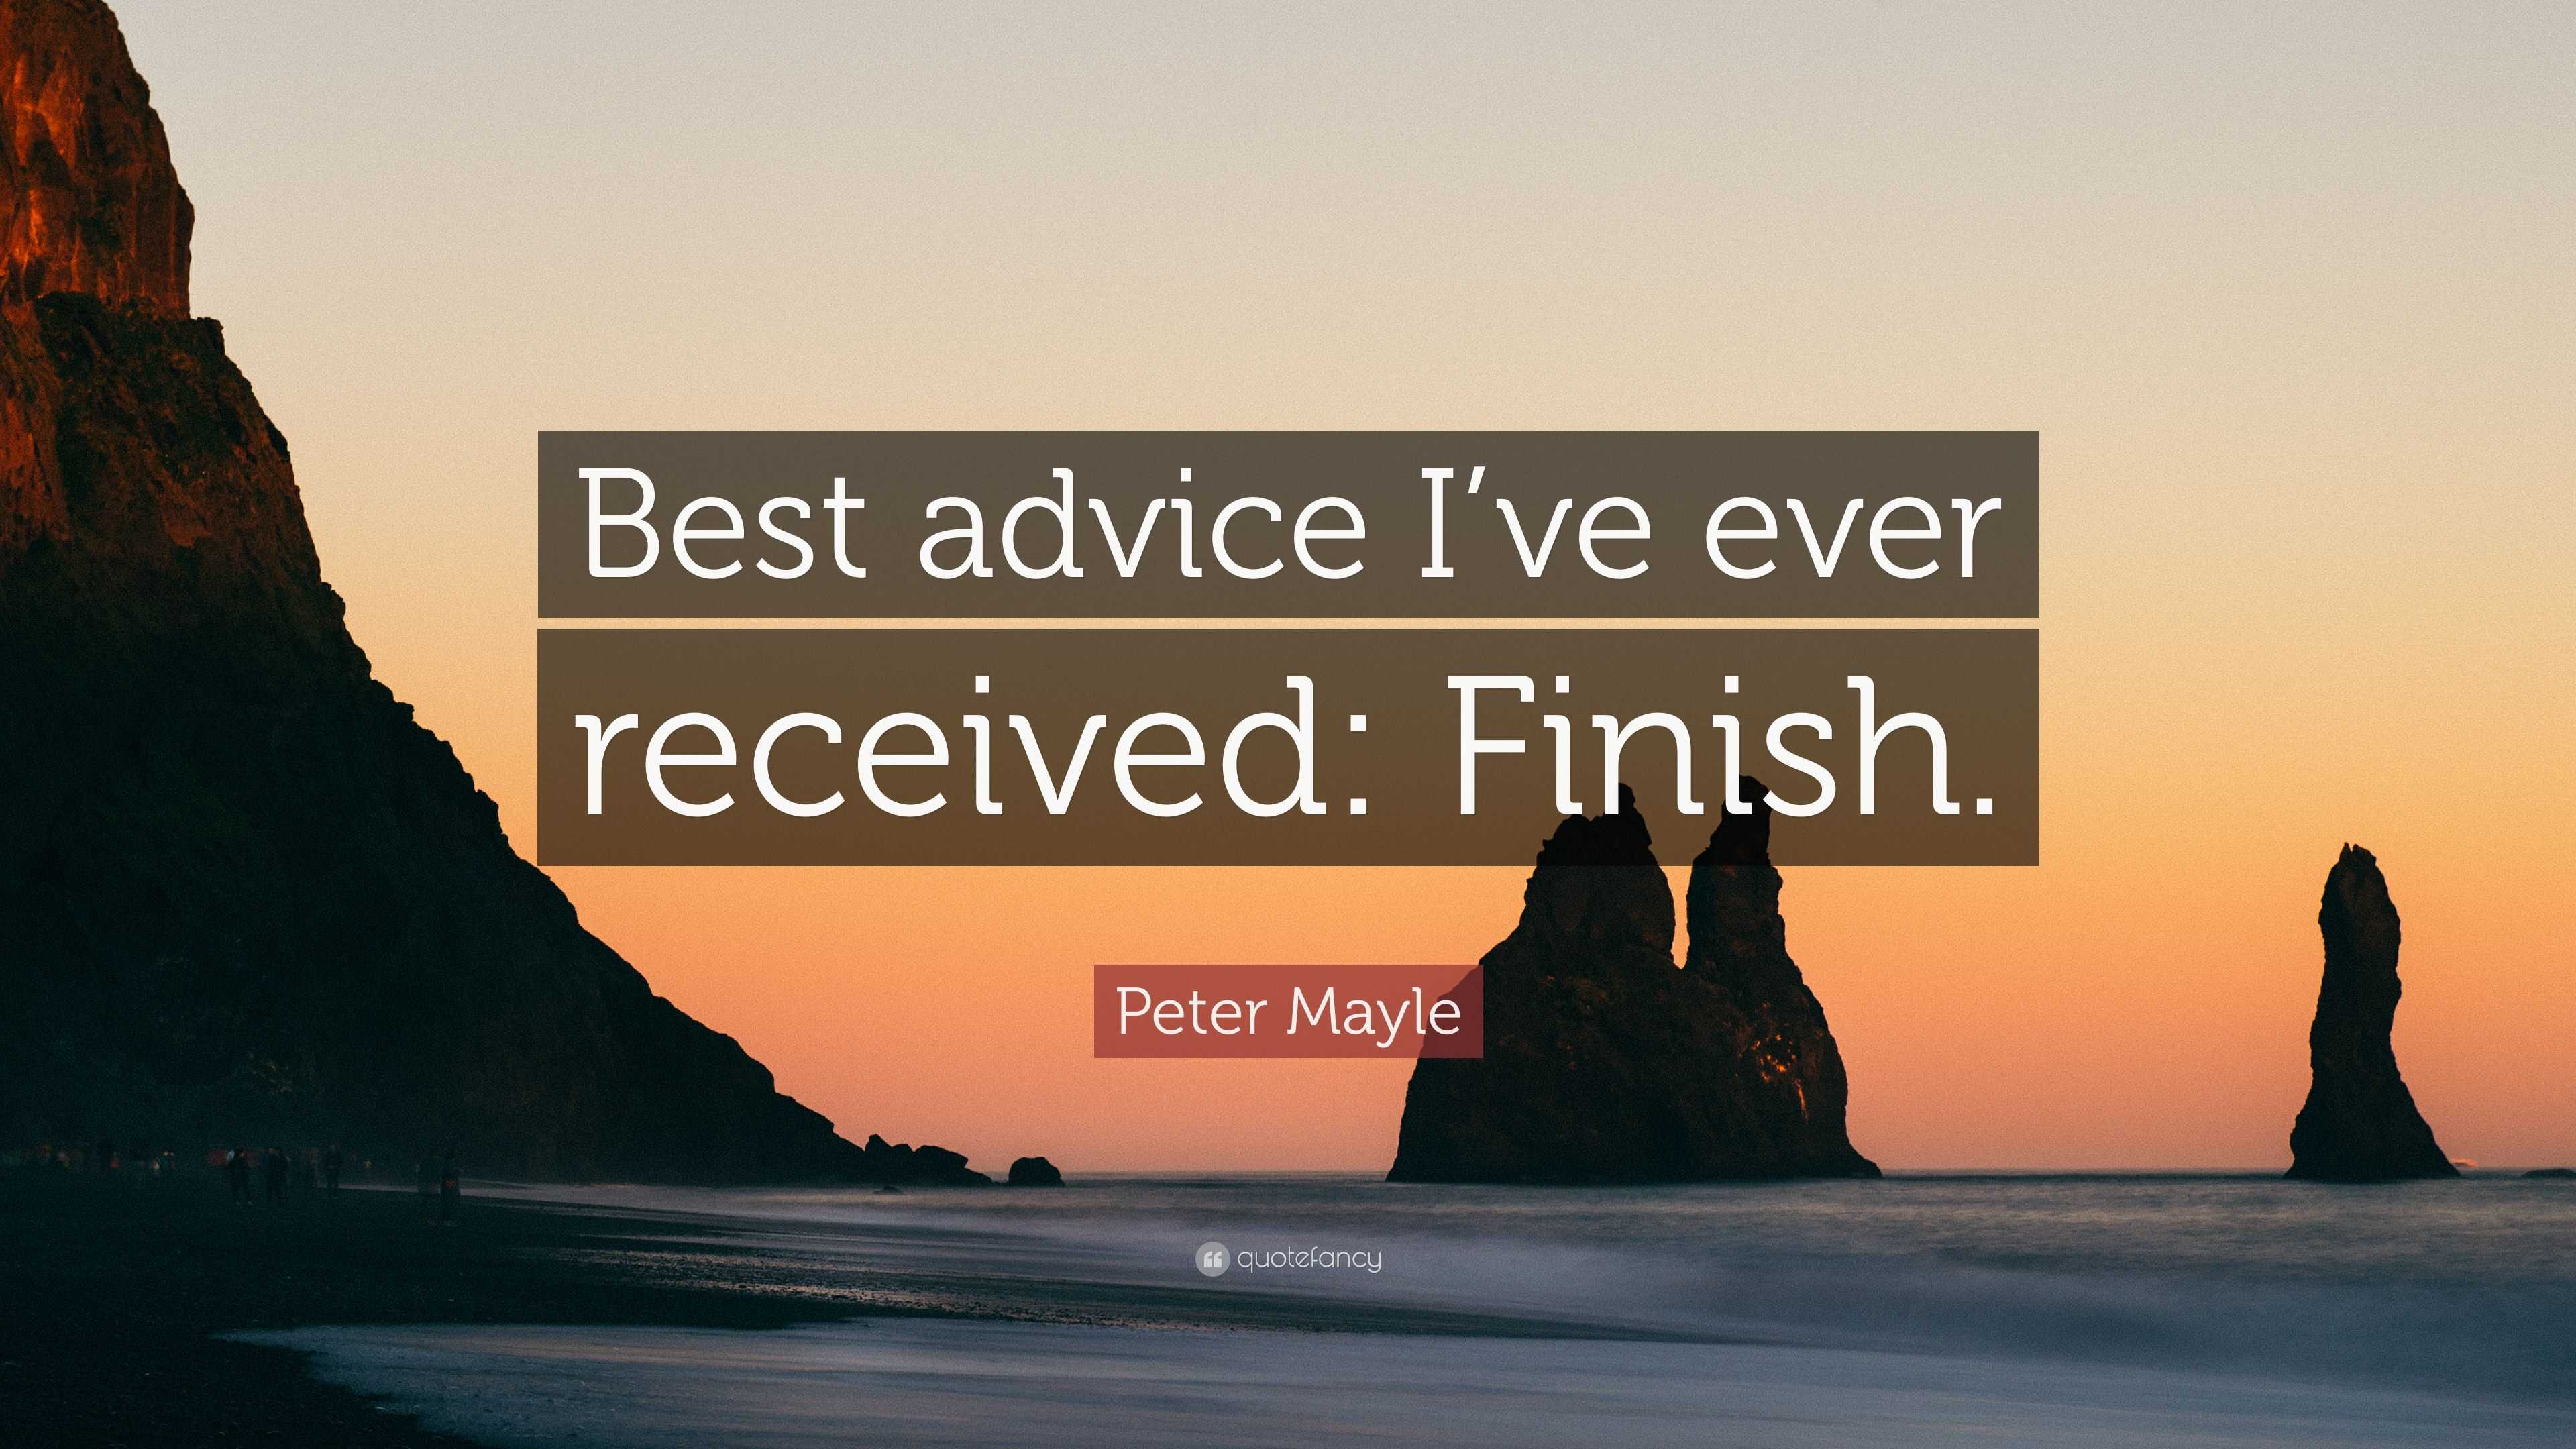 Peter Mayle Quote “best Advice Ive Ever Received Finish”